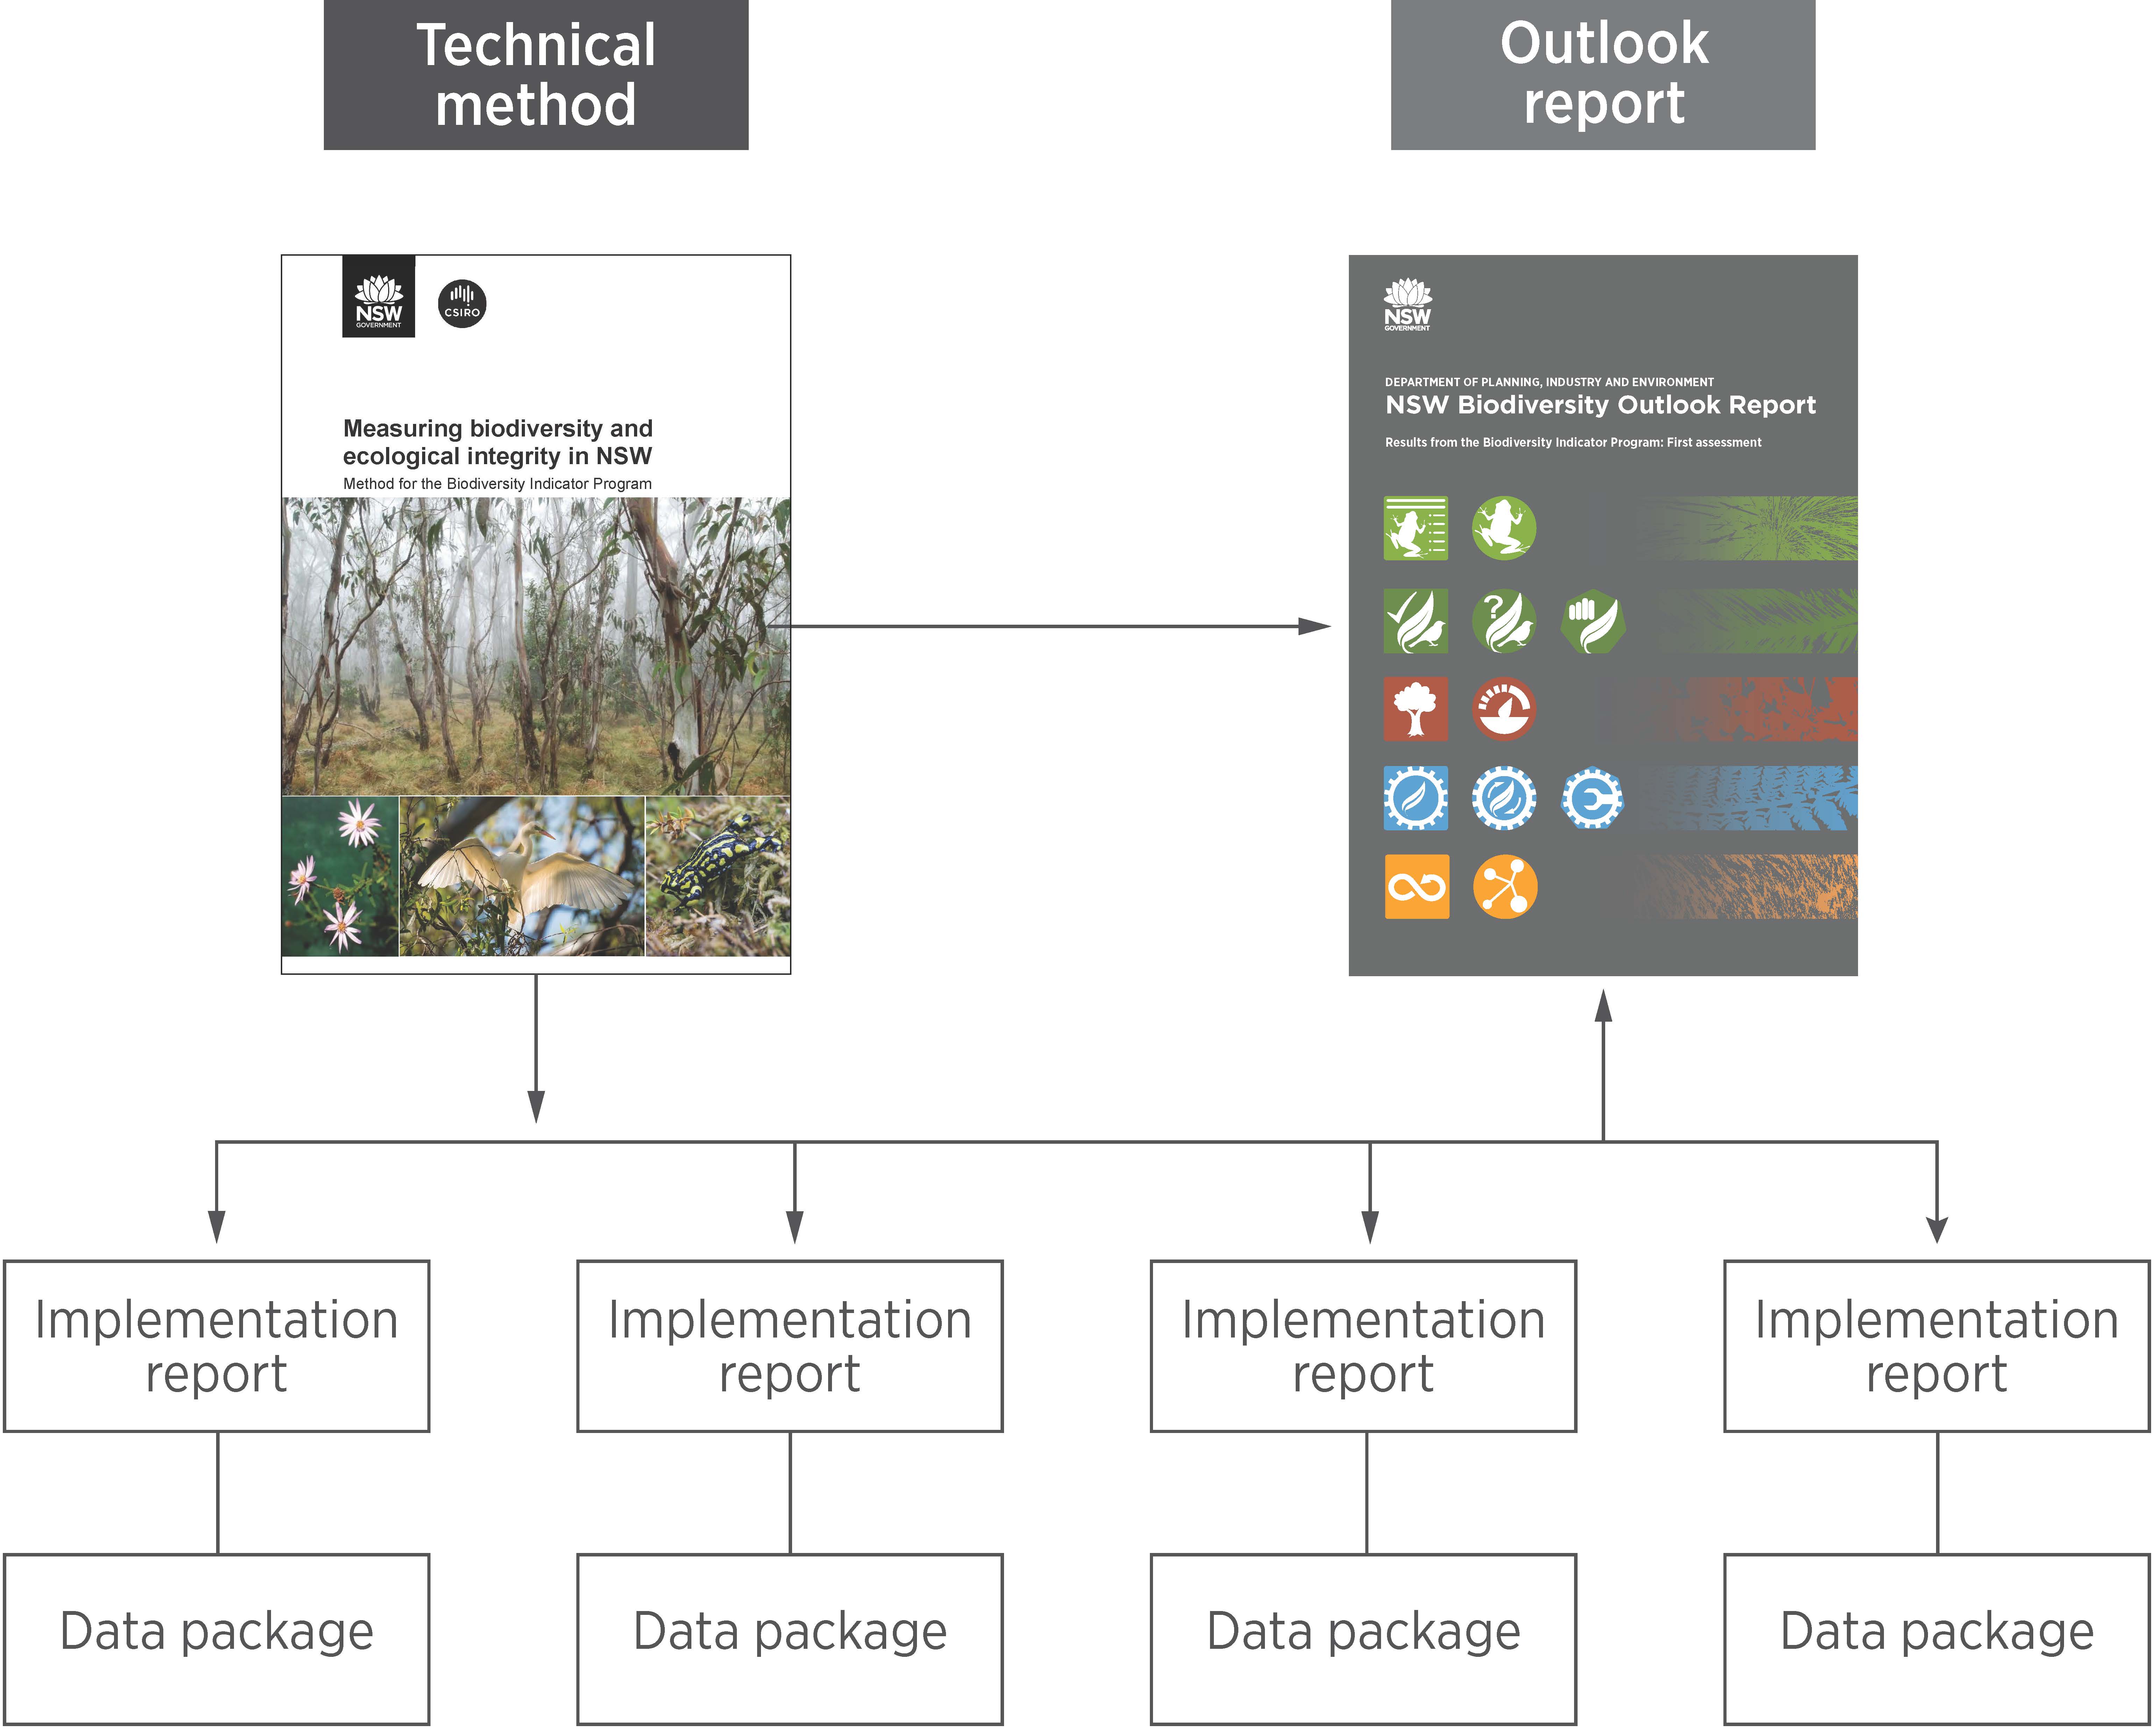 Tree diagram showing relationship between the Biodiversity Outlook Report, Method and implementation reports